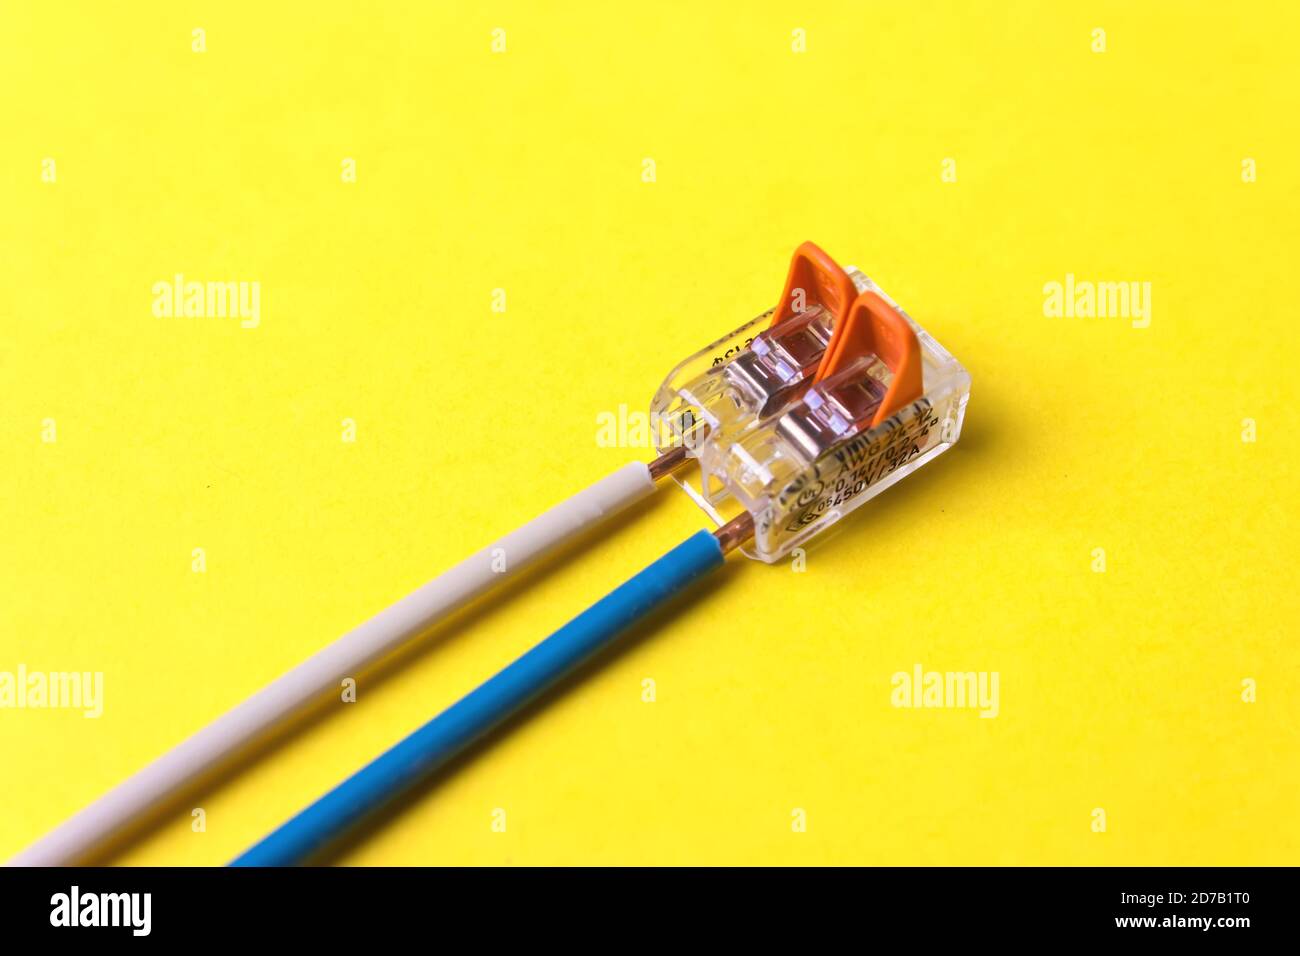 Compact orange splicing connector with two wires phase, zero. Connection concept Stock Photo